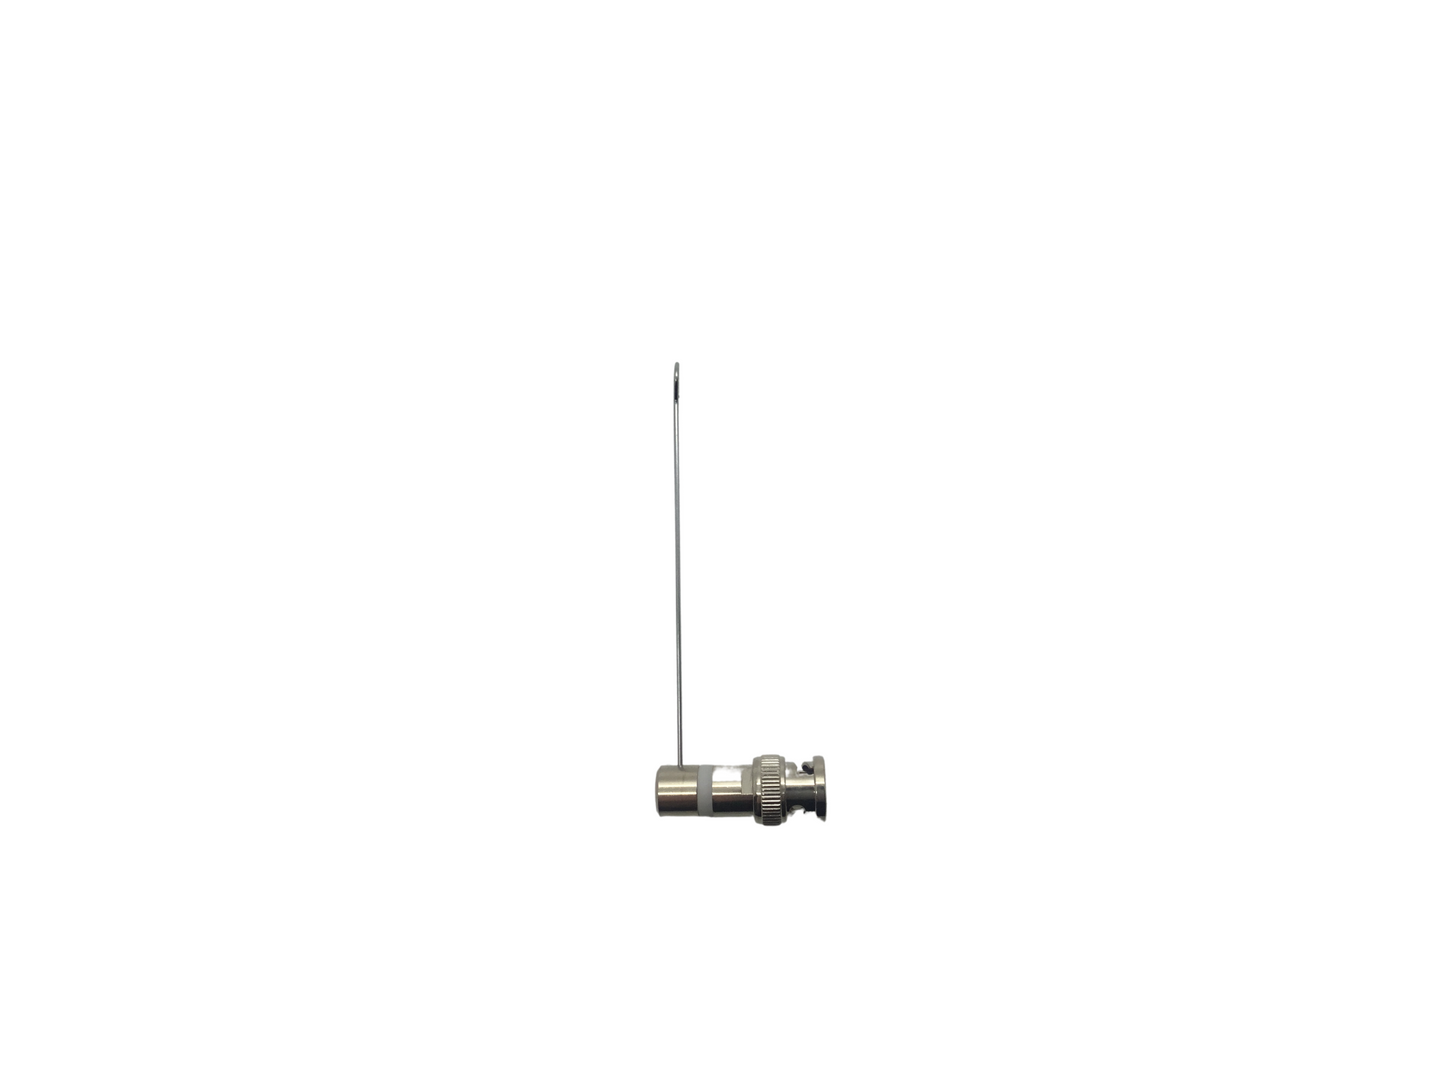 TOA Antenna for WT-5800 and WT-5805 Radio Mic Receivers